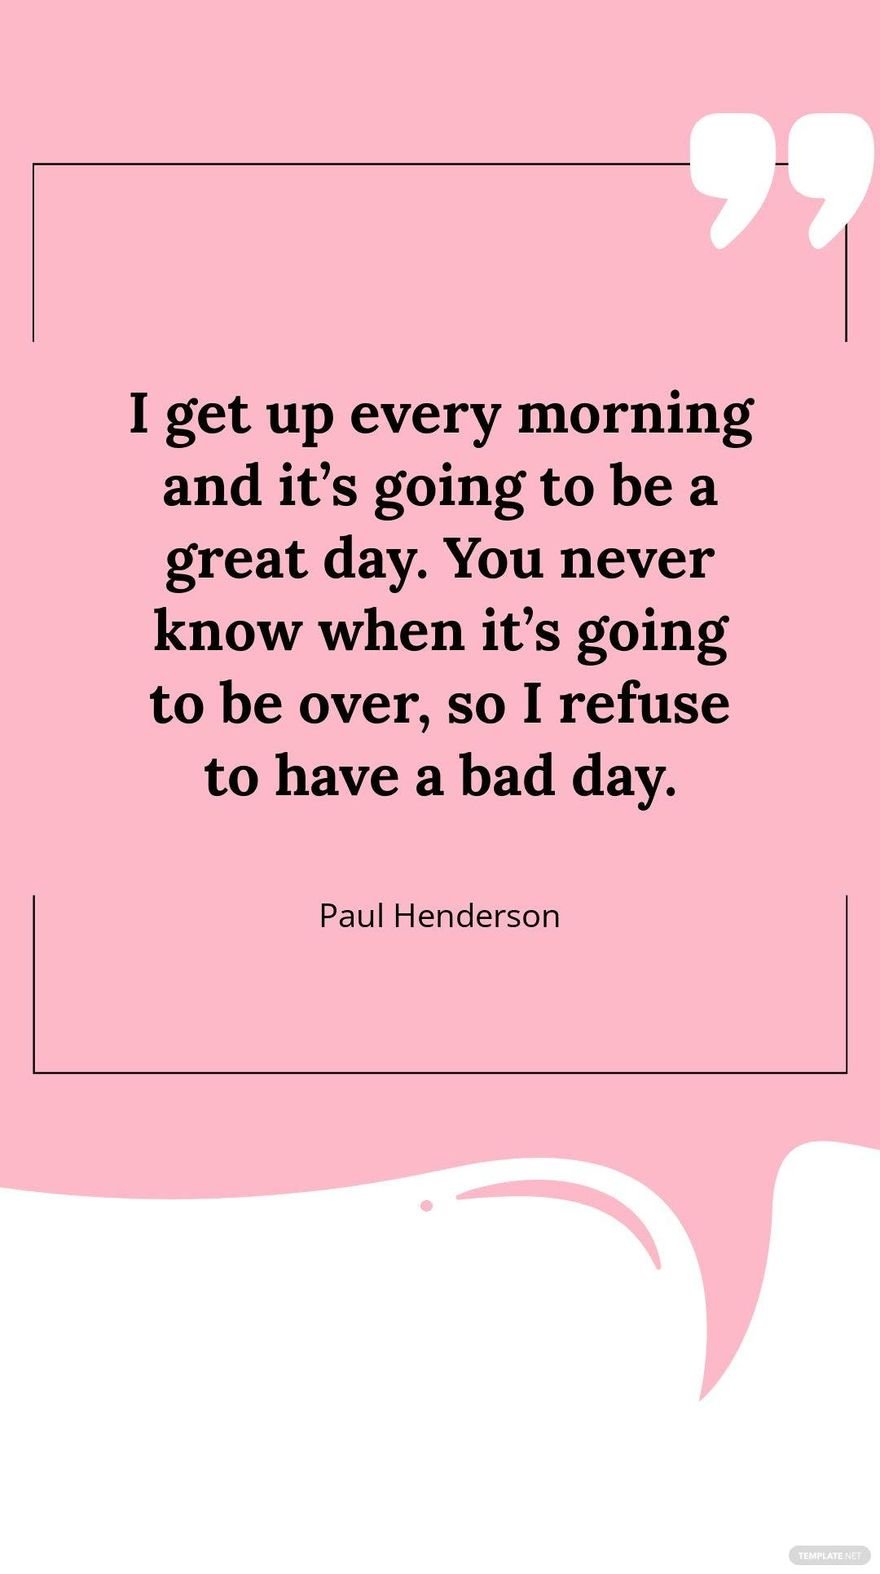 Paul Henderson - I get up every morning and it’s going to be a great day. You never know when it’s going to be over, so I refuse to have a bad day.